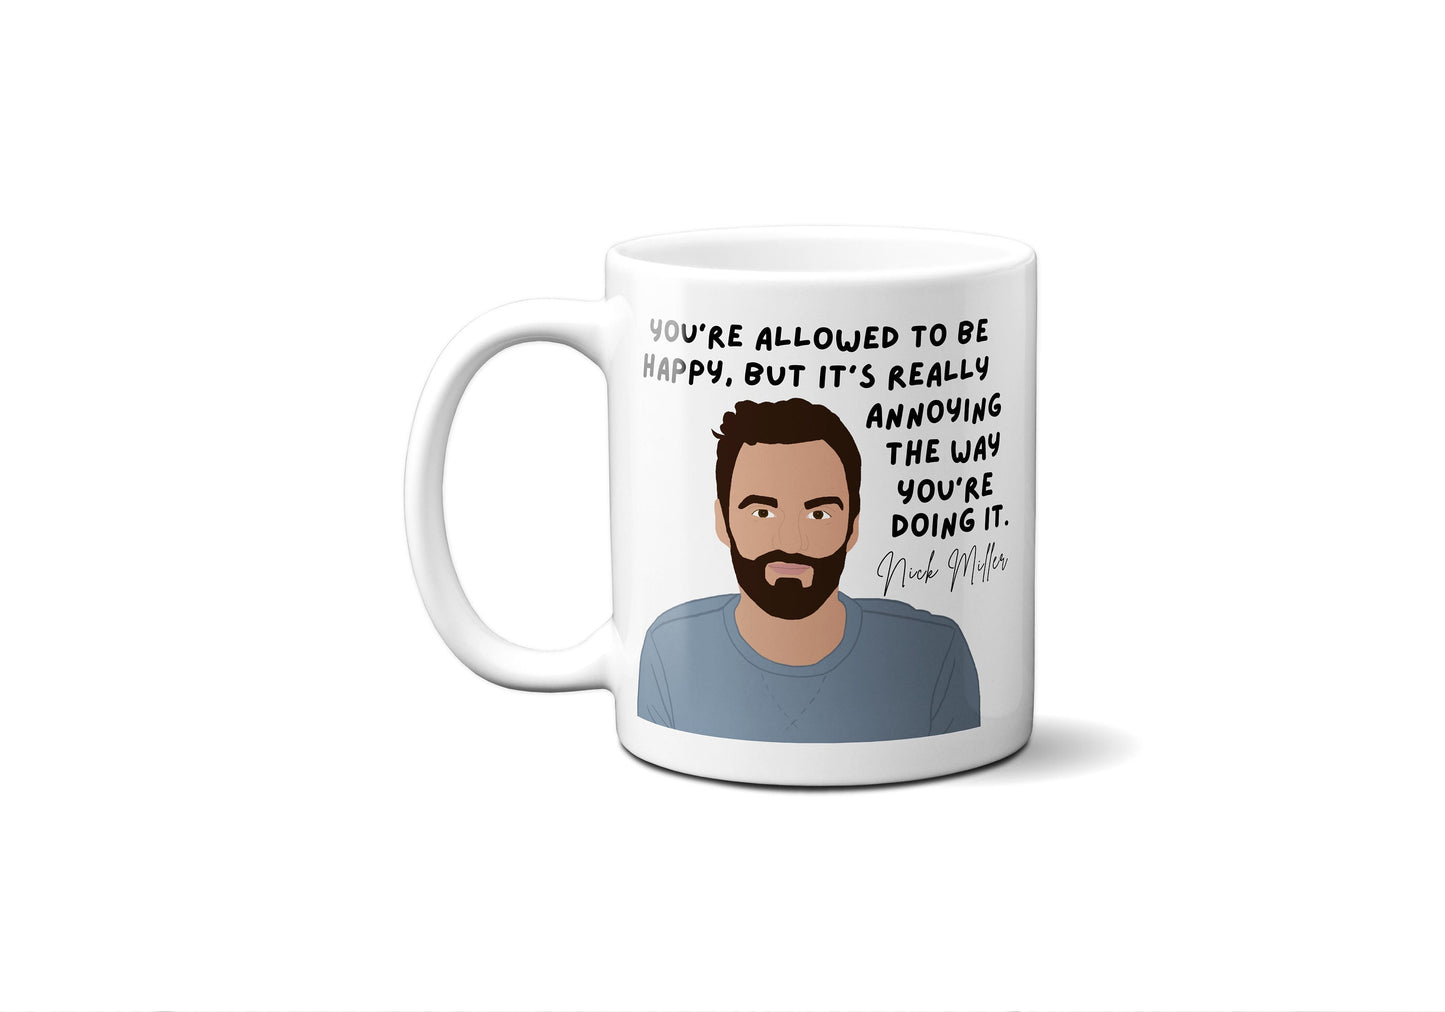 Nick Miller Quotes | New Girl Mug | You're allowed to be happy but its really annoying